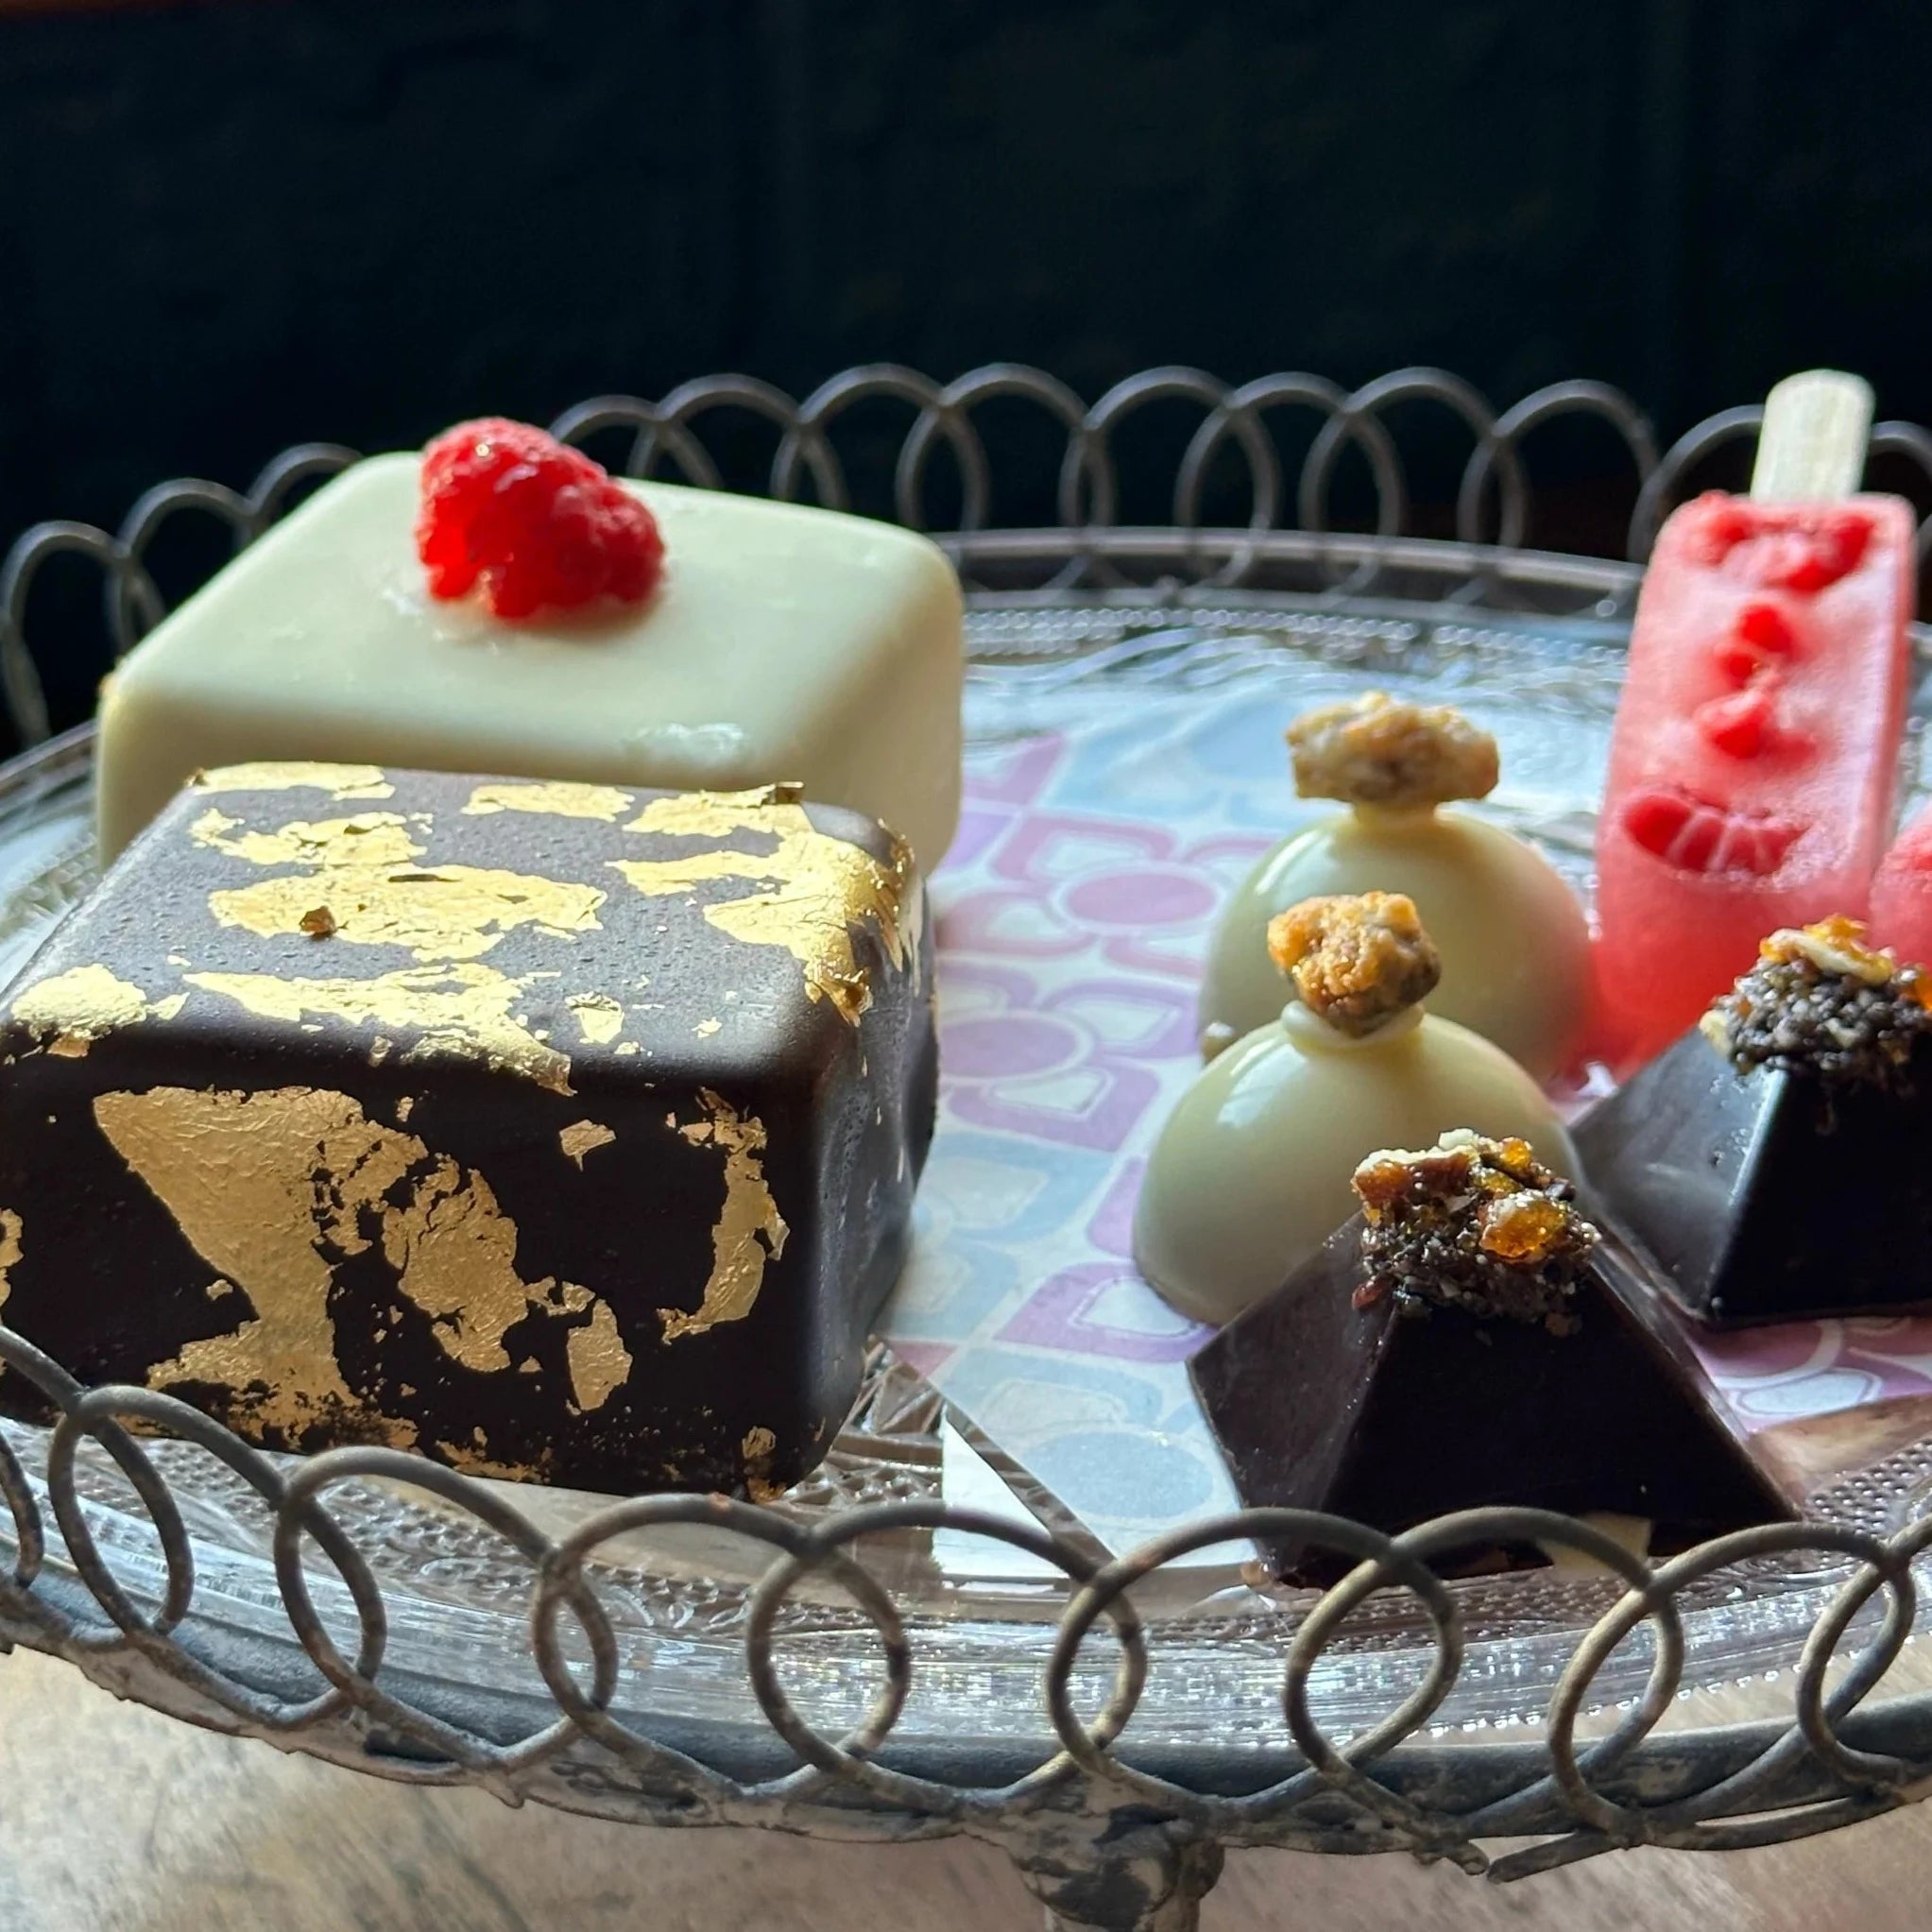 Square ice cream cakes coated in chocolate next to 4 ice cream chocolates and a sorbet on a stick